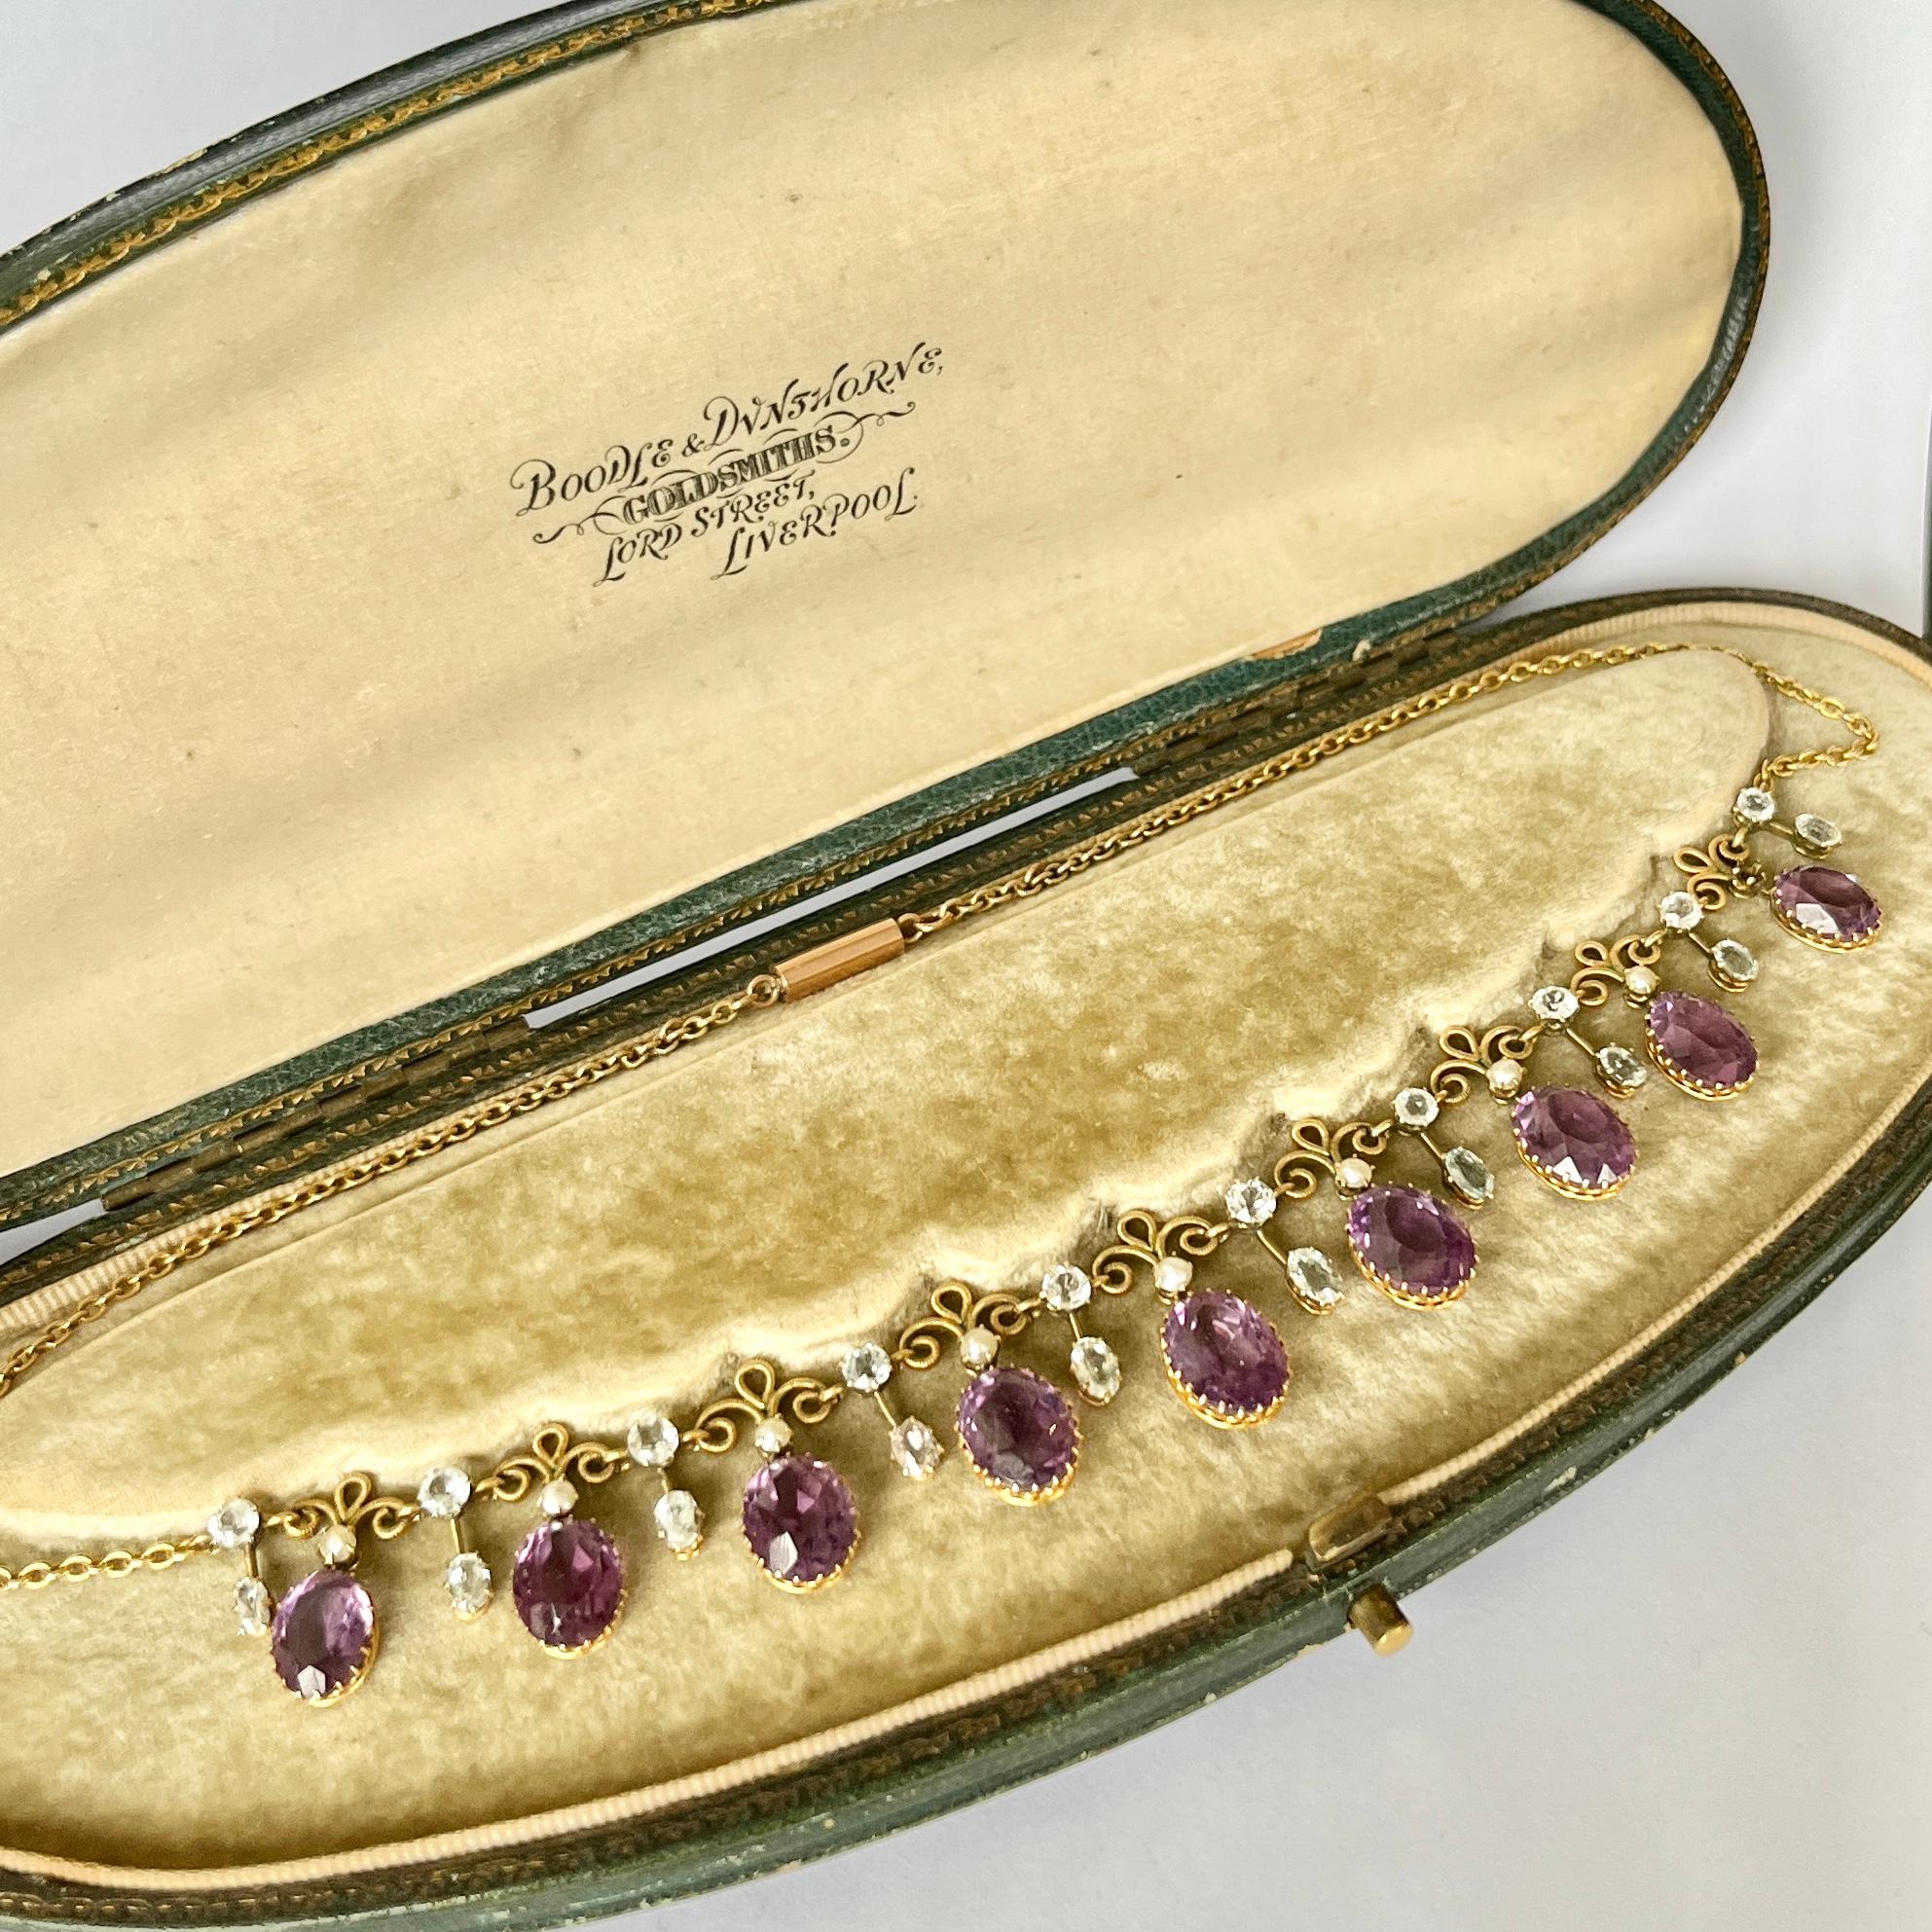 The amethyst stone are a gorgeous purple colour which sit beautifully in gold claw settings. The stones slightly graduate in size from the centre of the necklace to the fastening. In-between the stones is detailed gold work and there are drops set